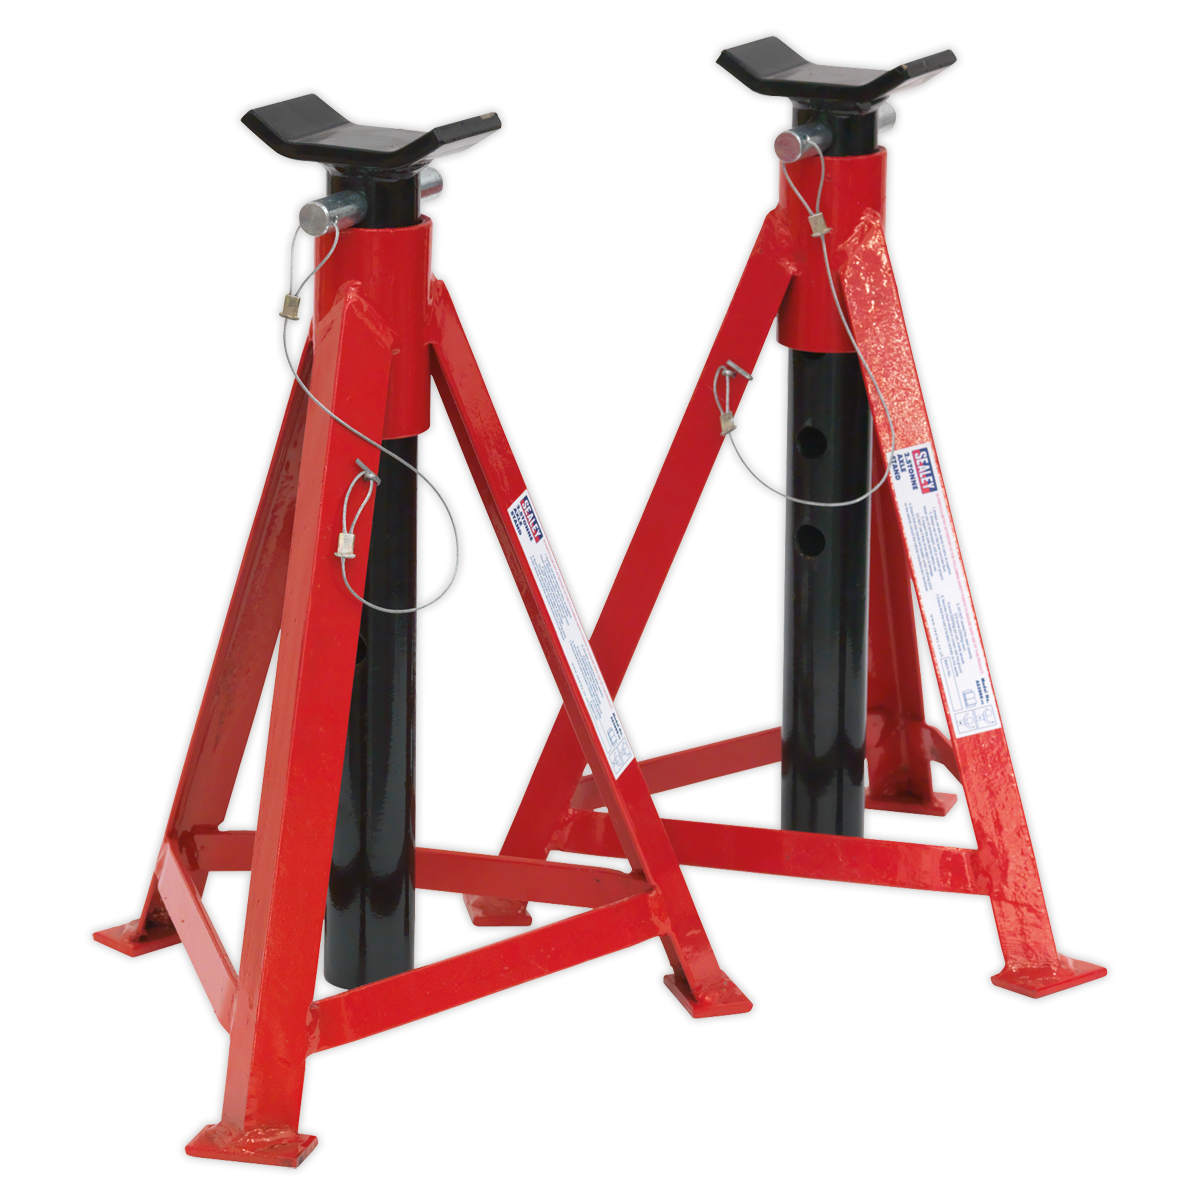 Sealey AS3000 Premier Axle Stands (Pair) 2.5 Tonne Capacity per Stand Medium Height